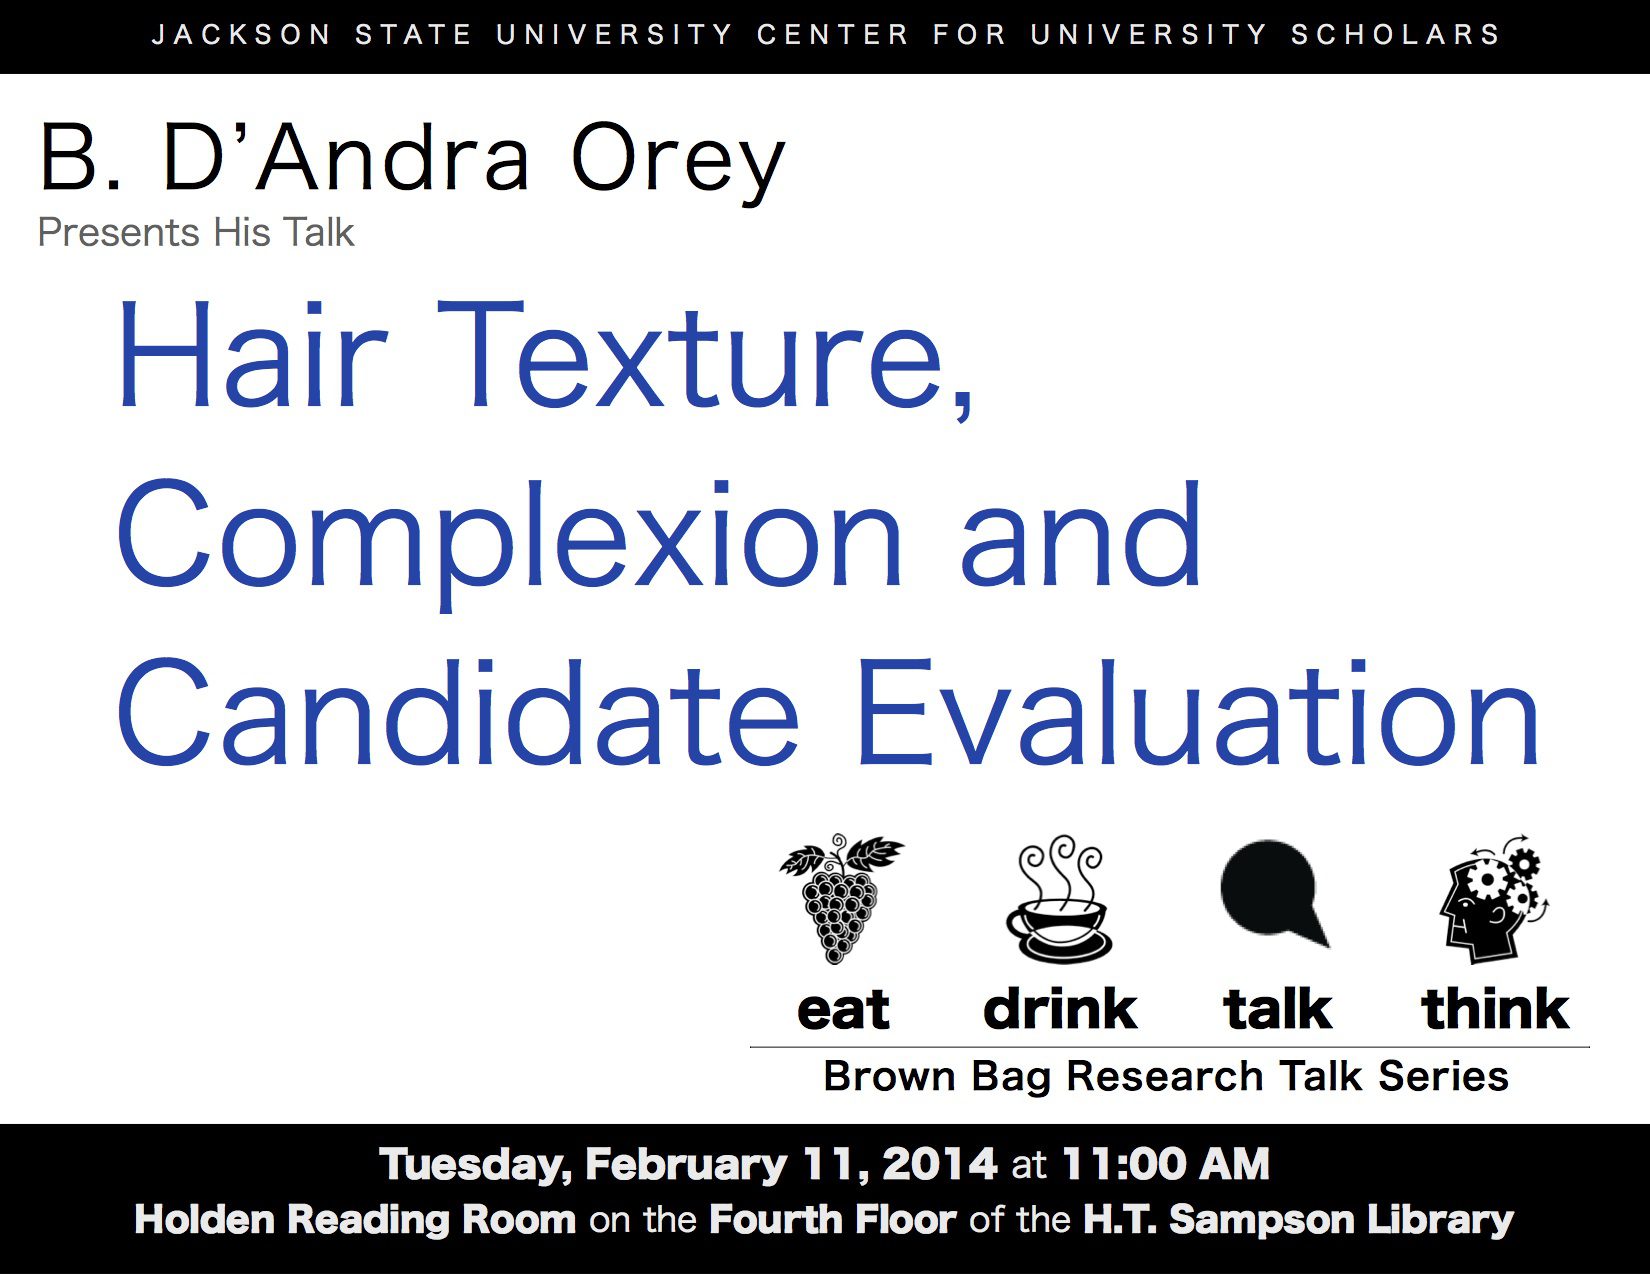 Flyer for Brown Bag Research Talk with Dr. Orey